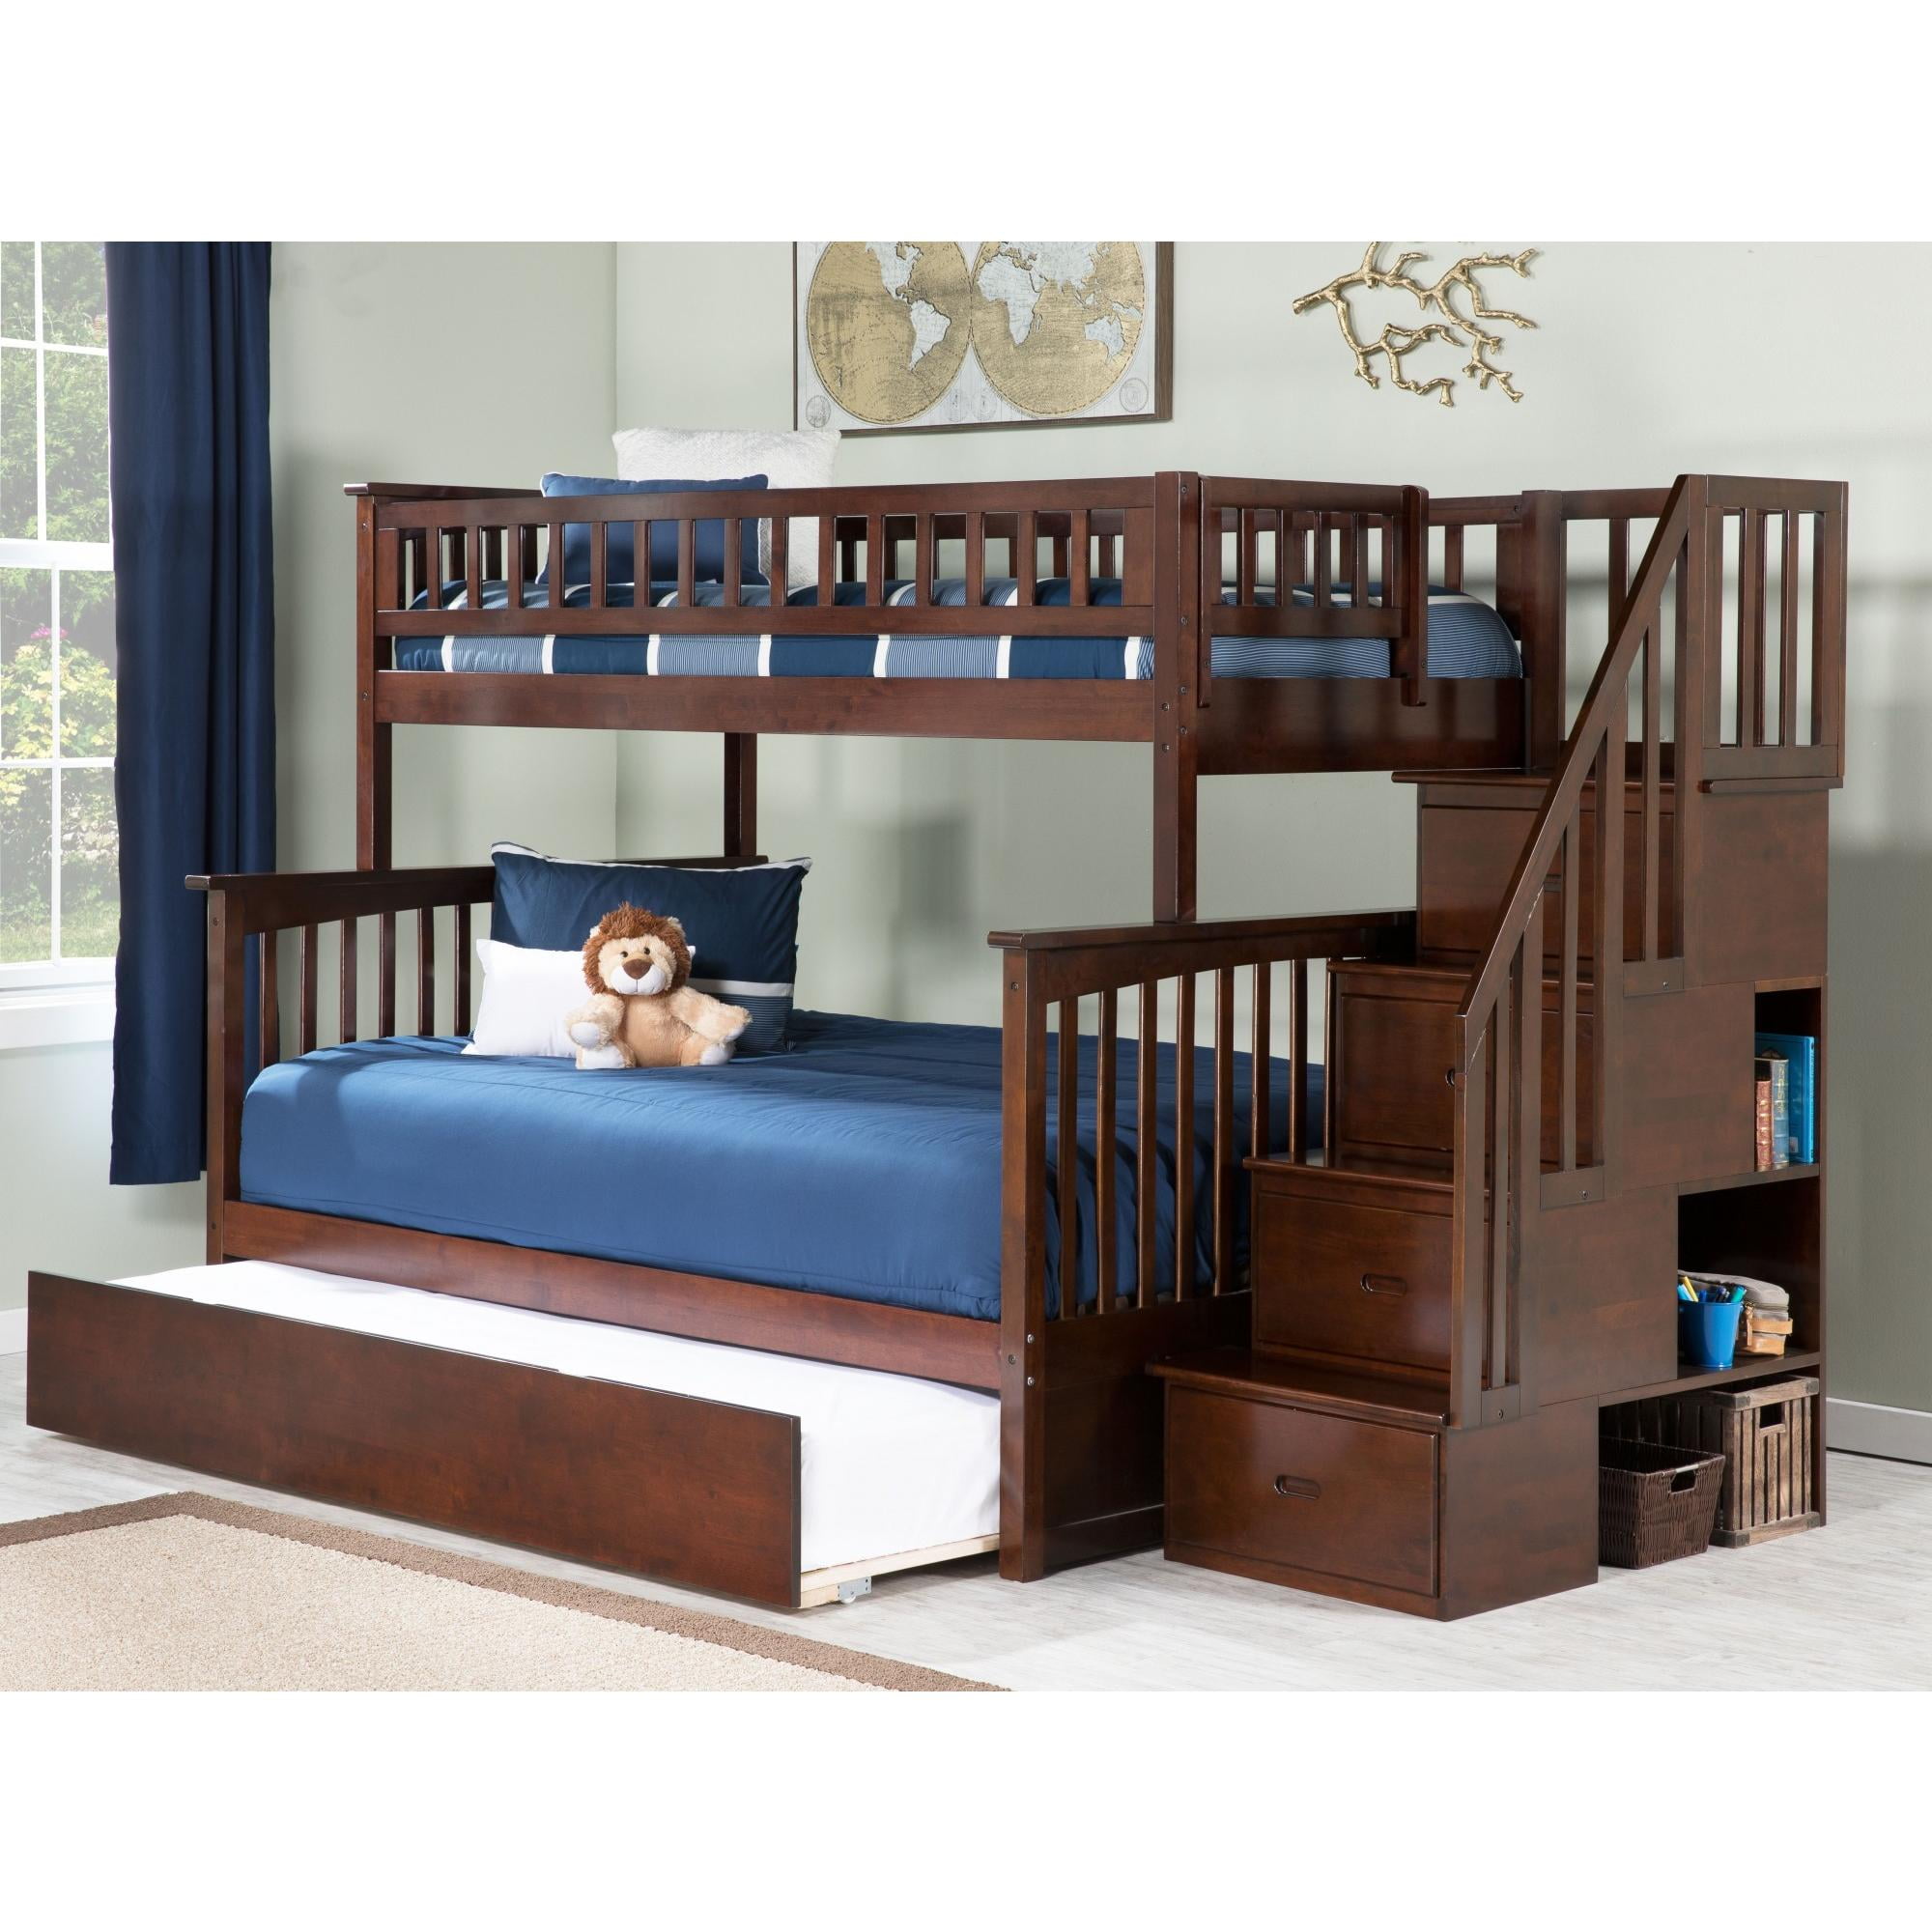 Columbia Staircase Bunk Bed Twin Over, How To Build Bunk Beds With Drawers